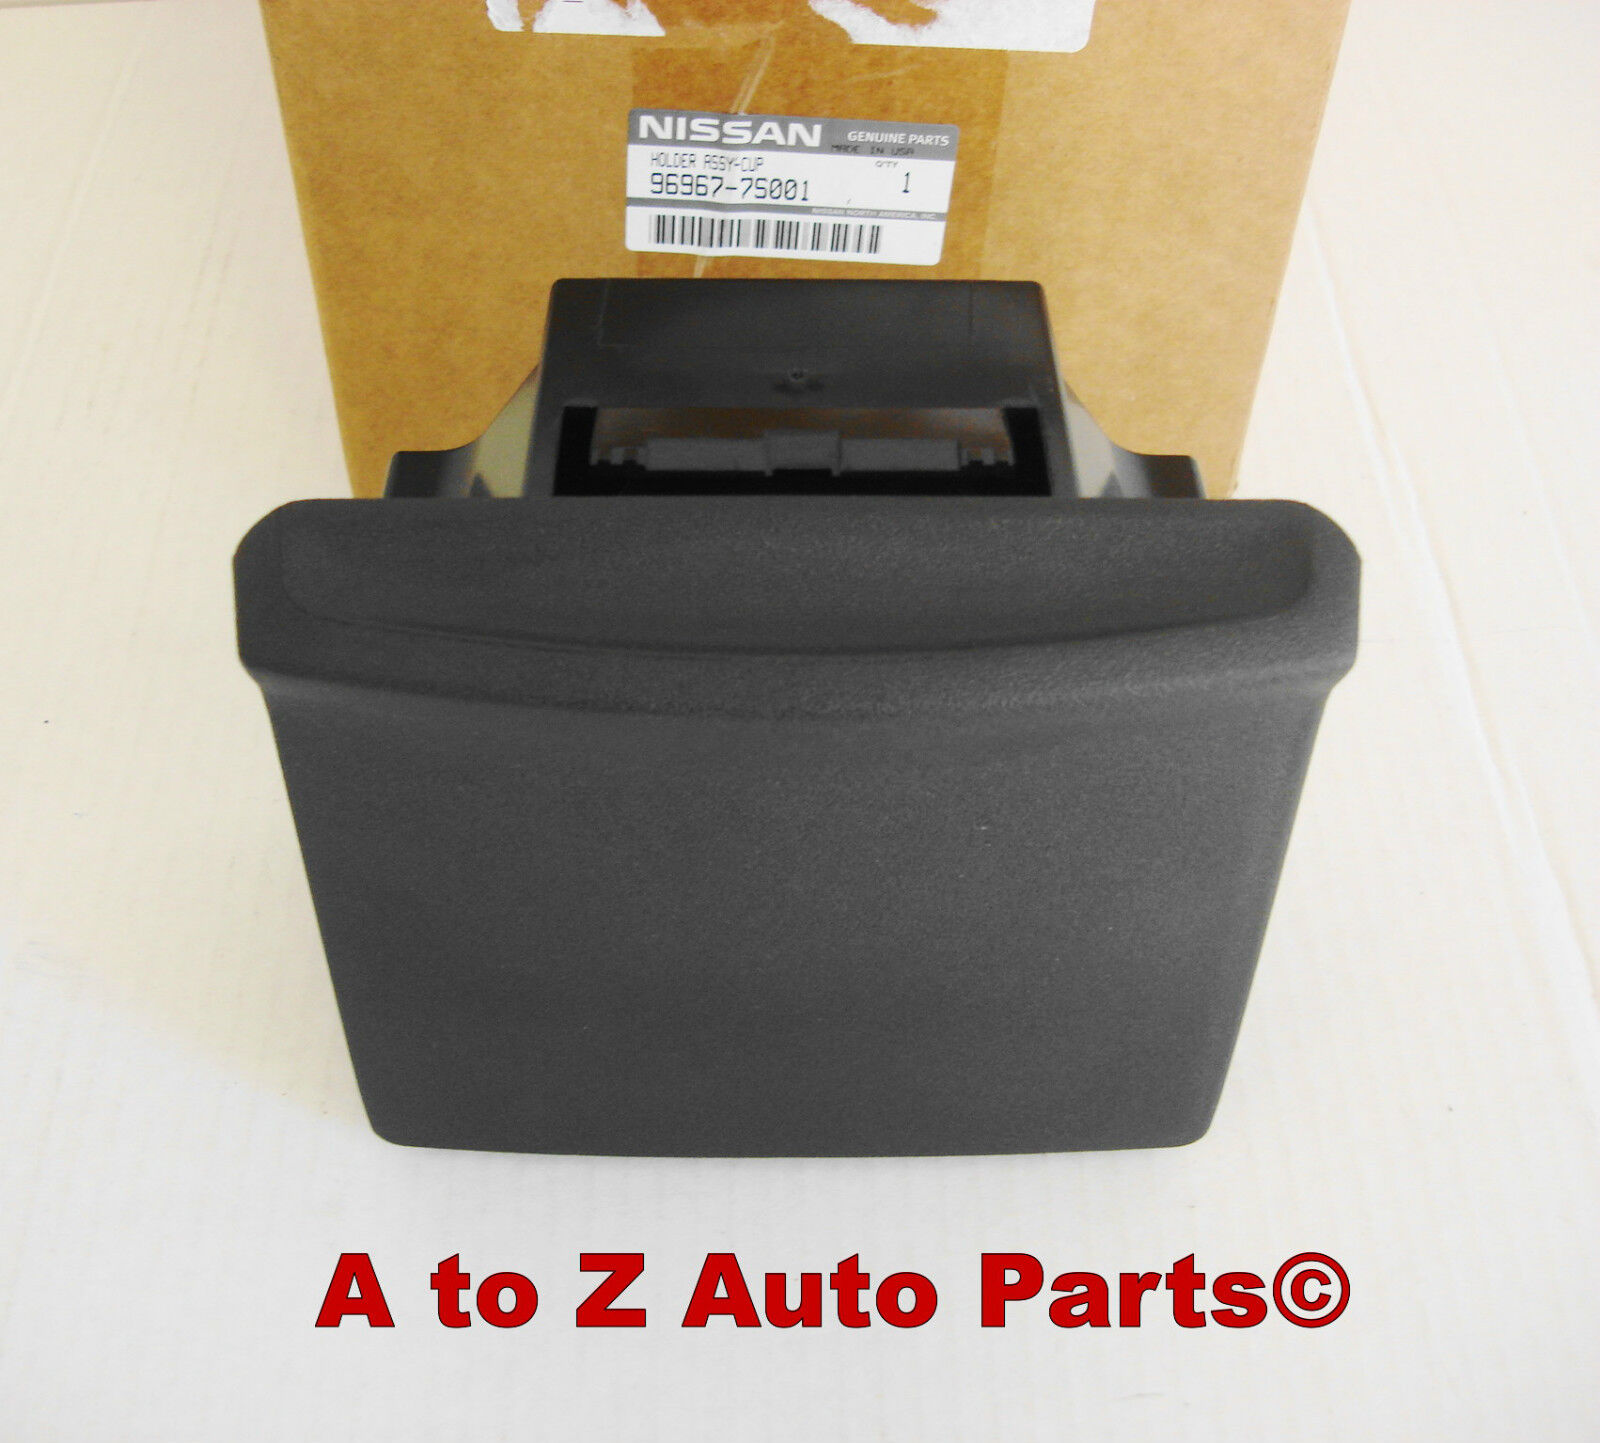 NEW 2004-2007 Nissan Titan Graphite Grey CUP HOLDER Assembly, OEM Nissan